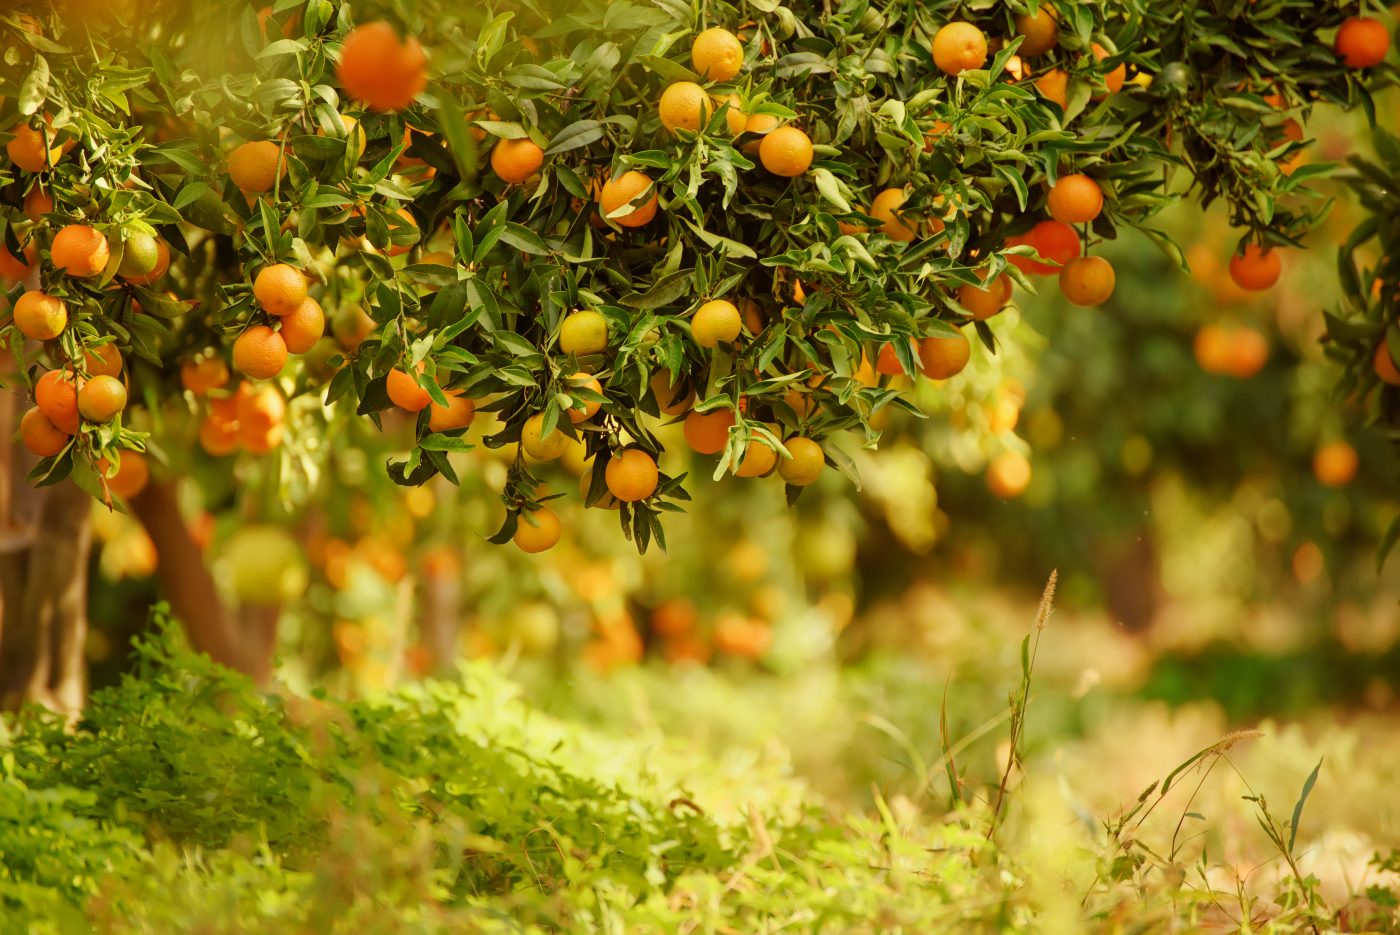 Tangerine sunny garden with green leaves and ripe fruits. Mandarin orchard with ripening citrus fruits. Natural outdoor food background